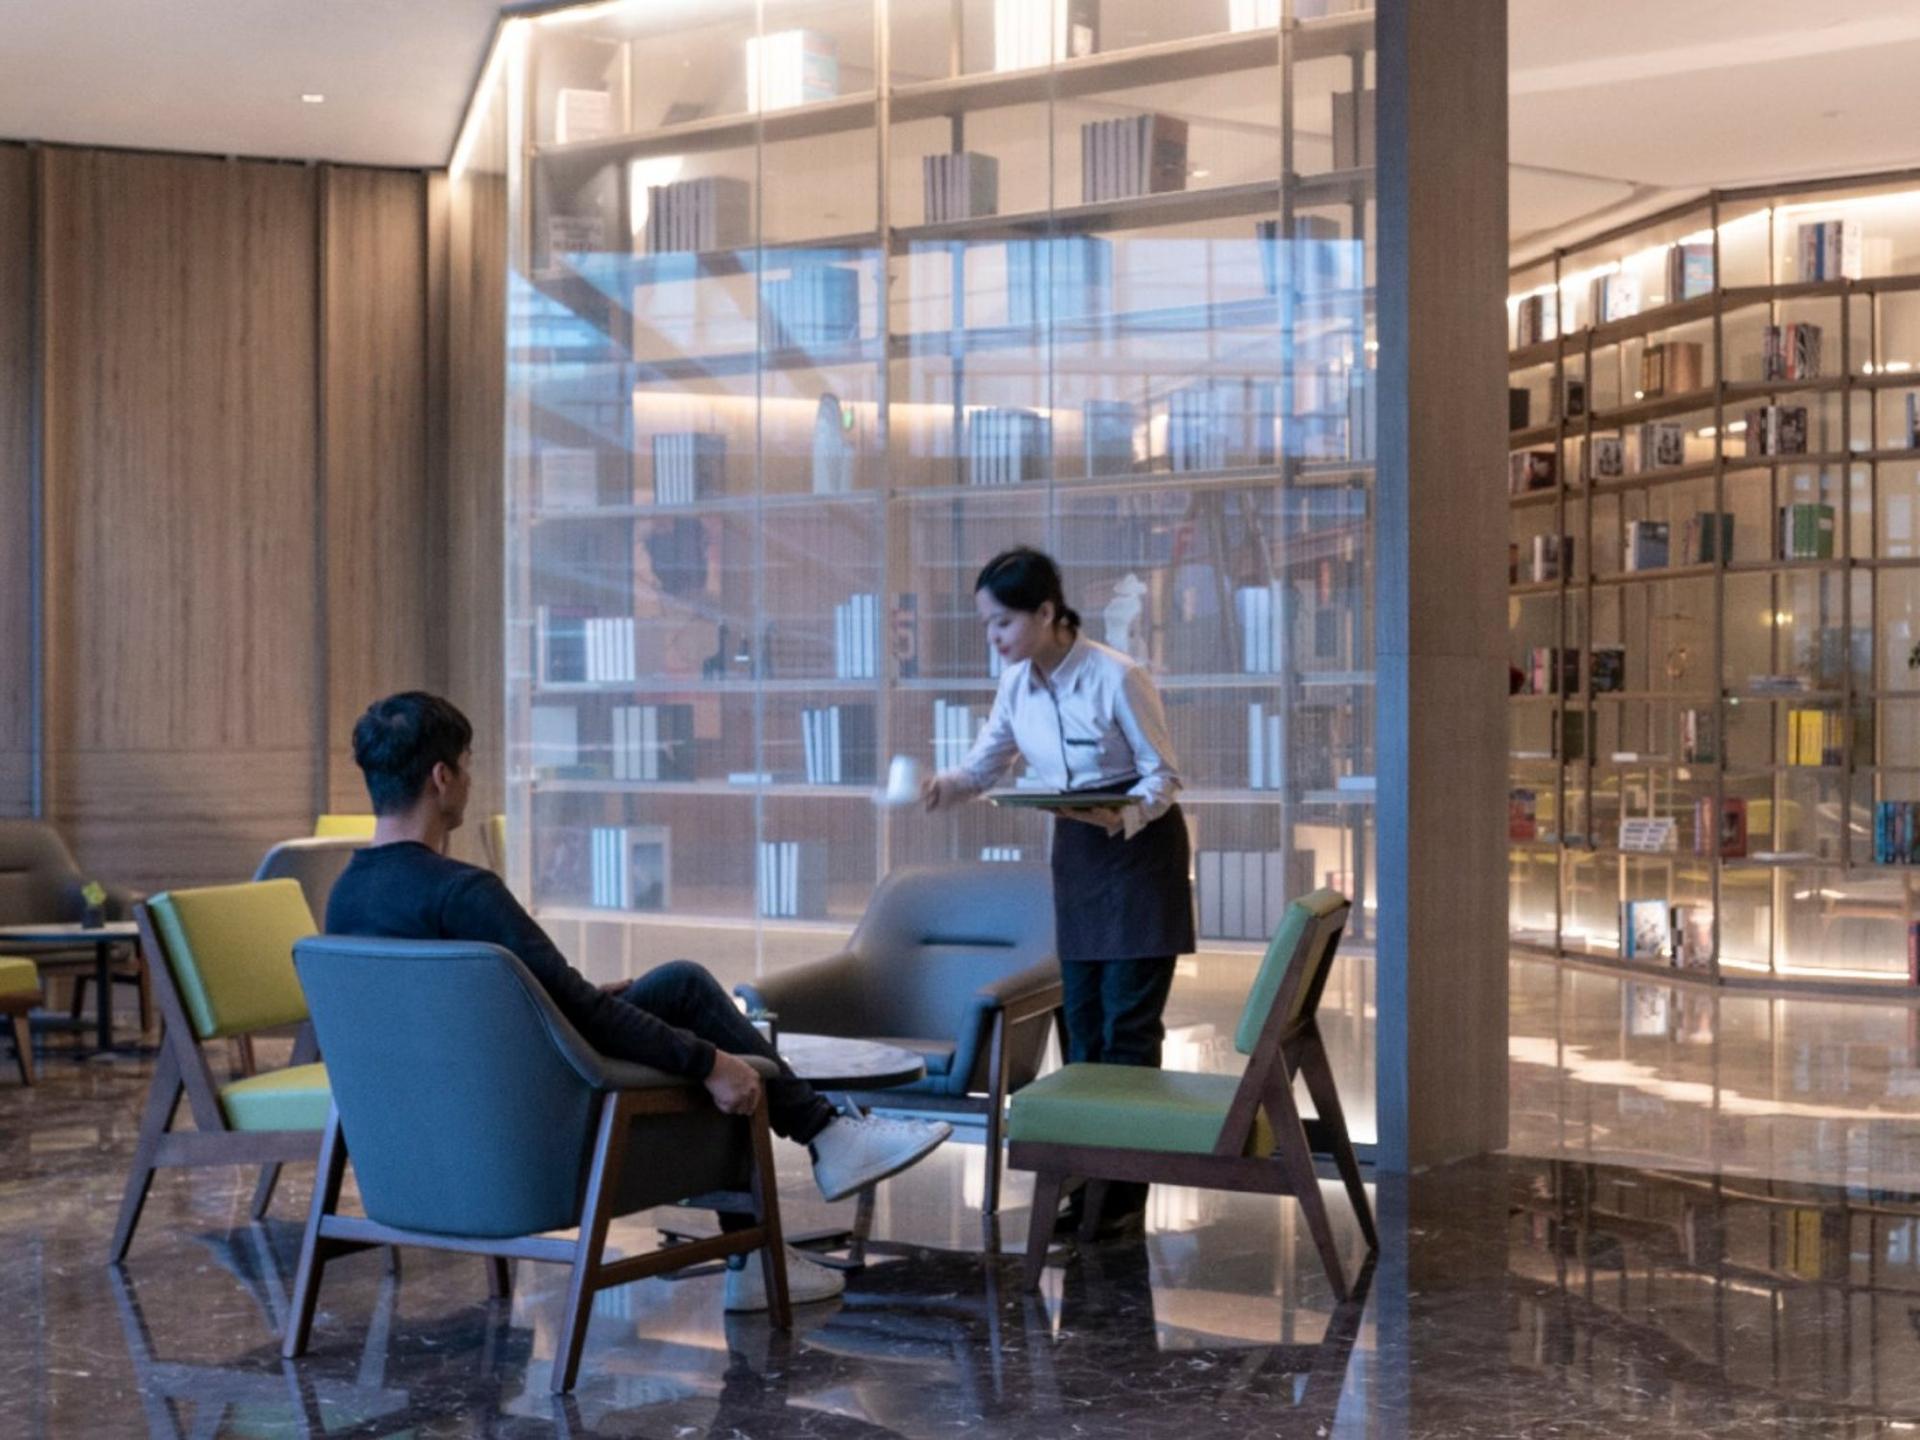 Library Lounge by Aerotel Beijing image 1 of 4